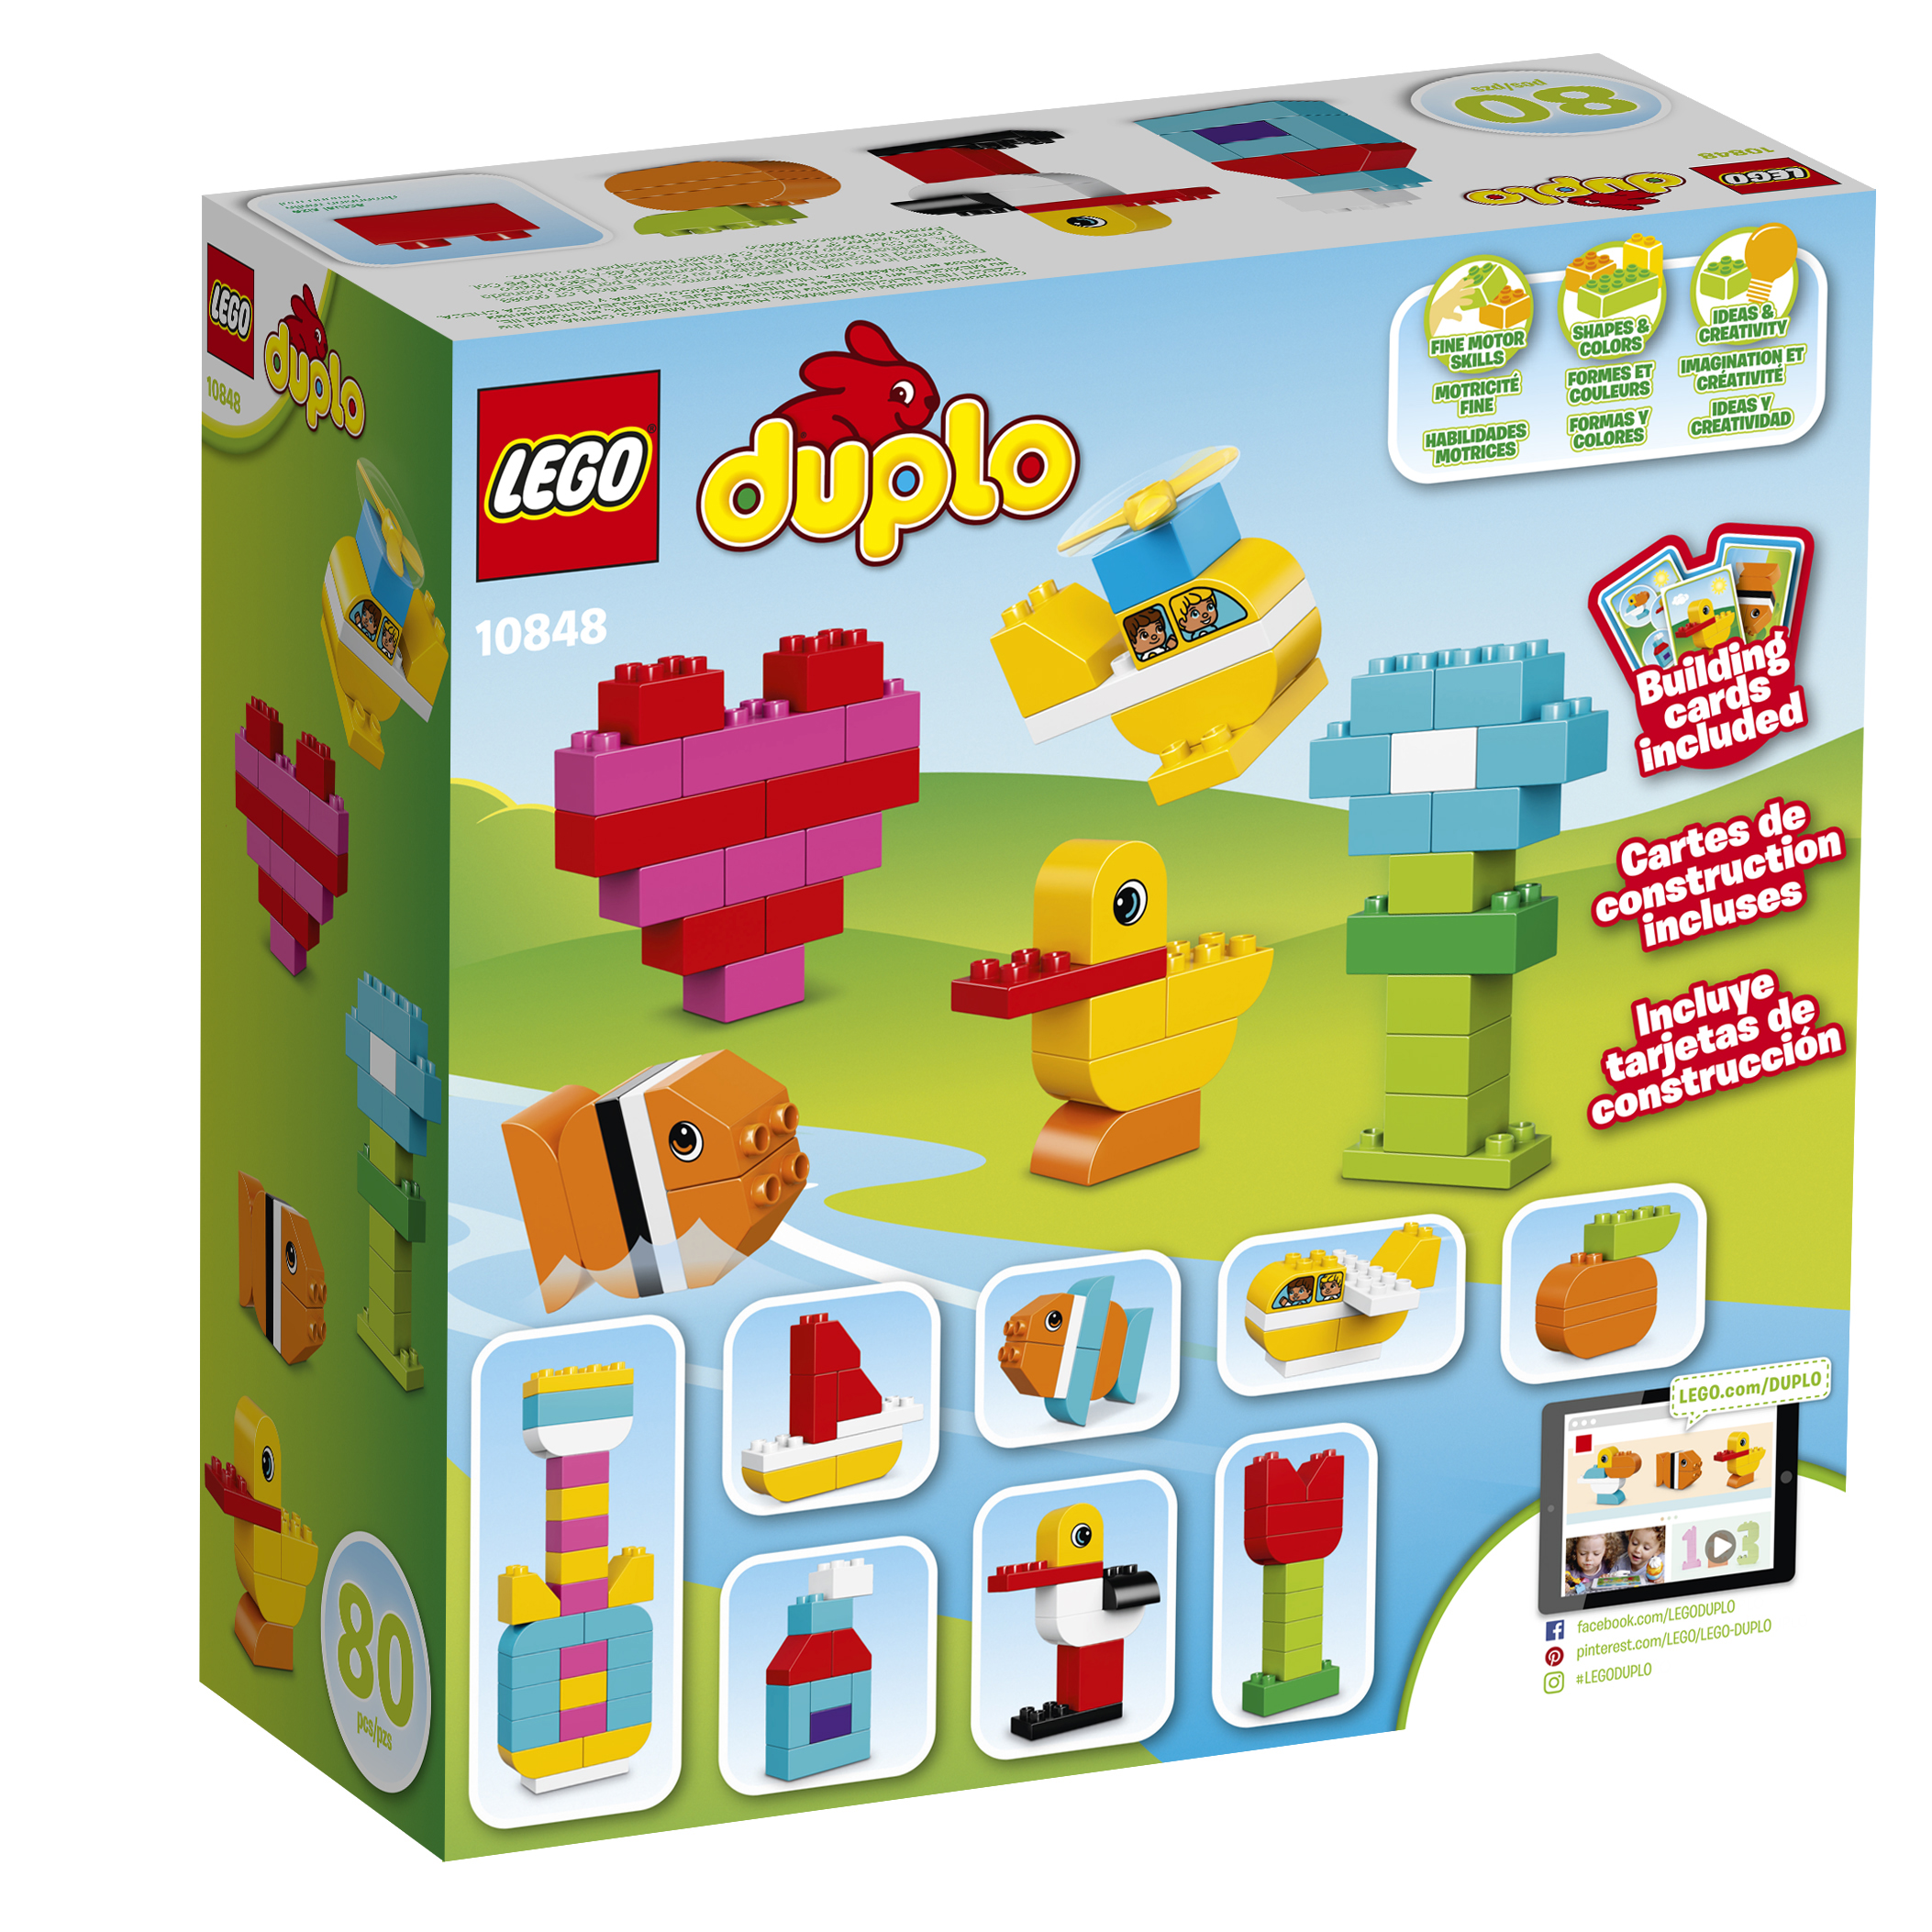 LEGO DUPLO My First Bricks 10848 Building Set (80 Pieces) - image 4 of 6